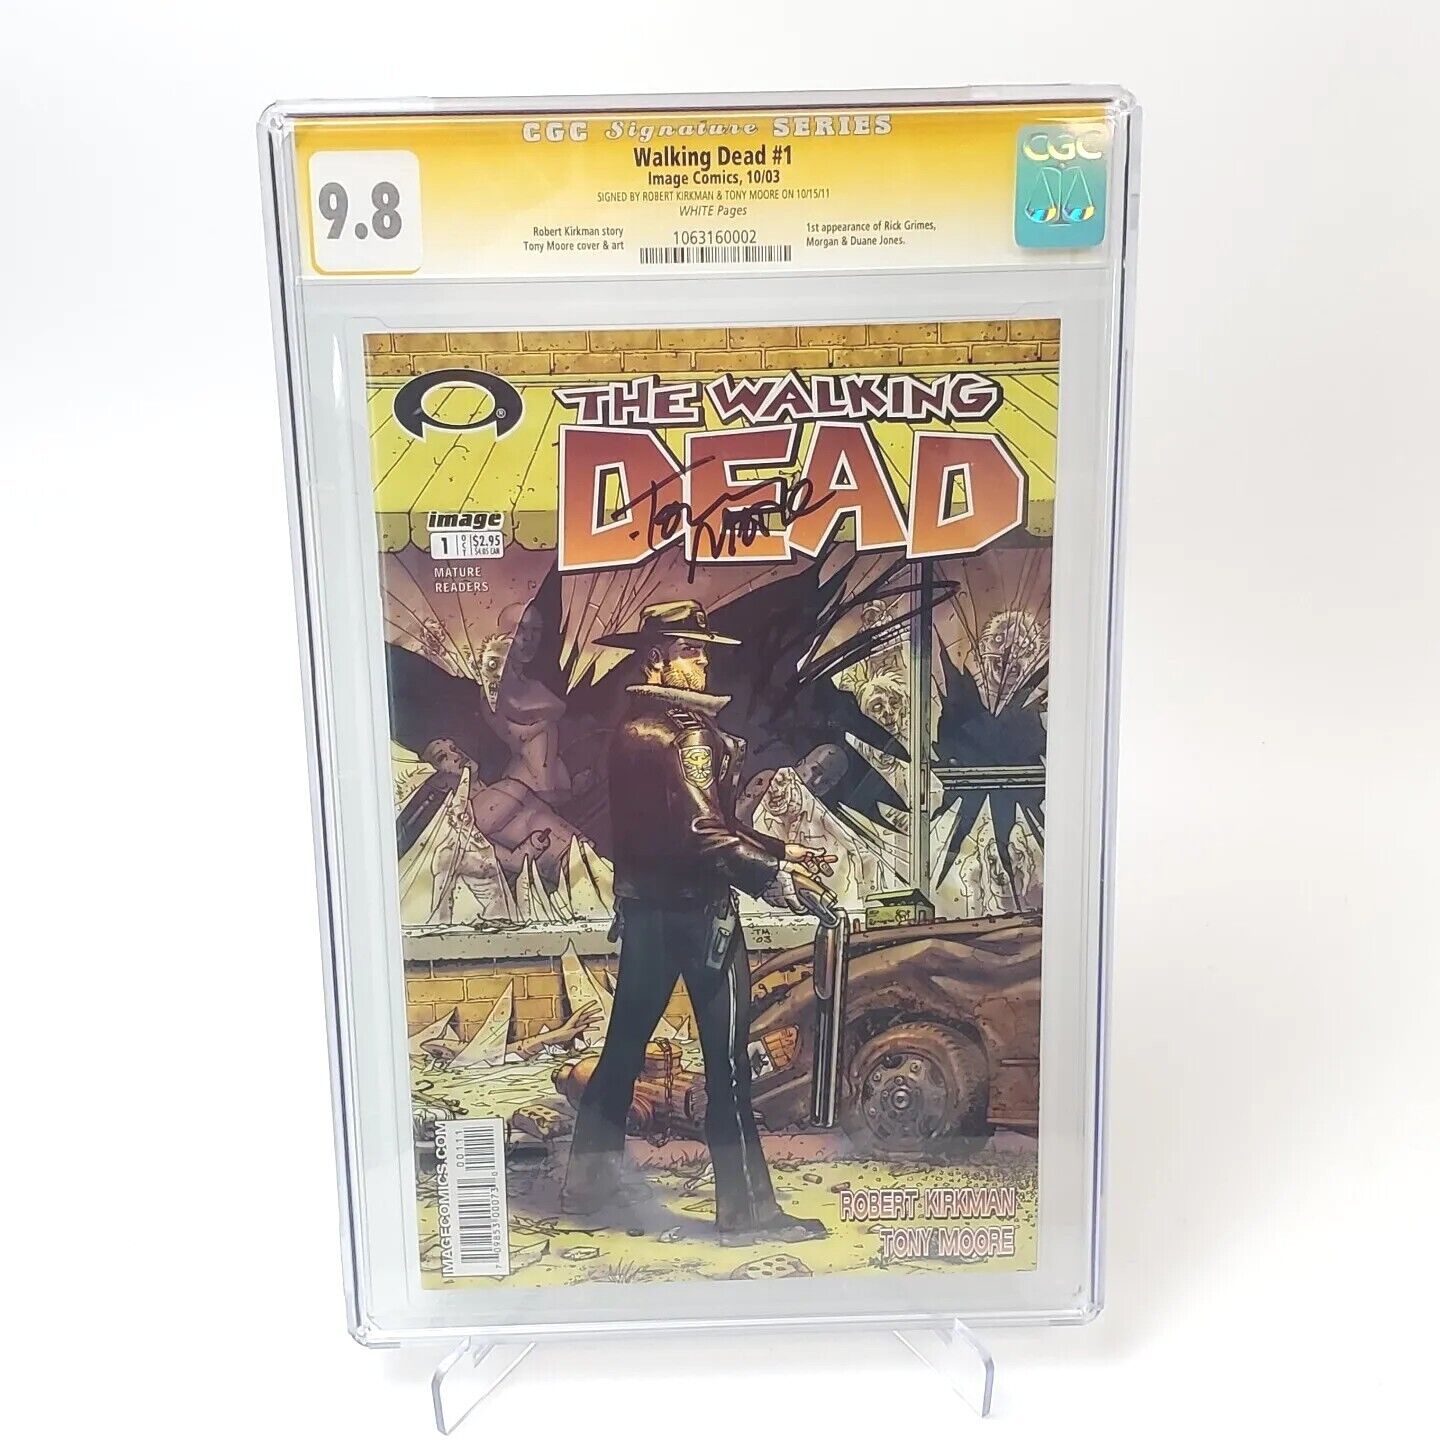 Walking Dead #1 CGC 9.8 White Pages - Signed by Robert Kirkman & Tony Moore